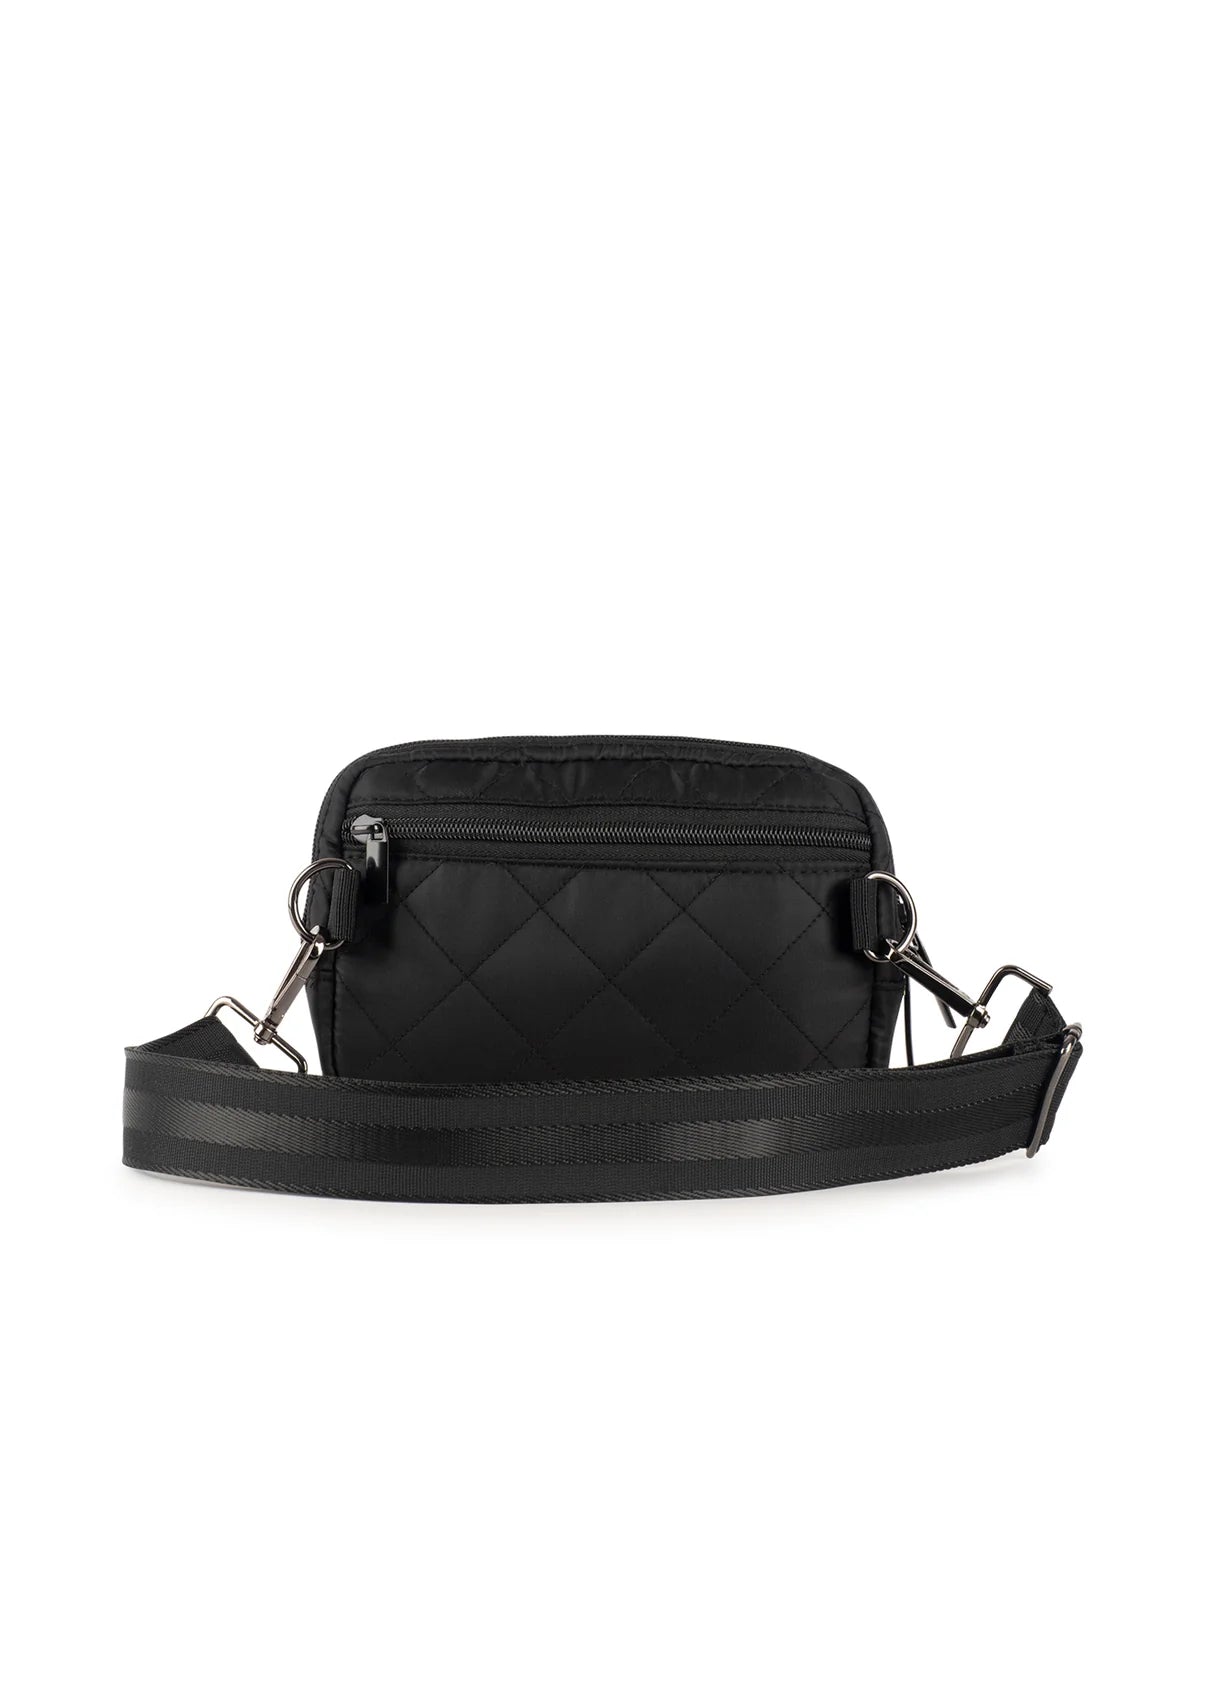 The Amy Sling Bag - Carbon